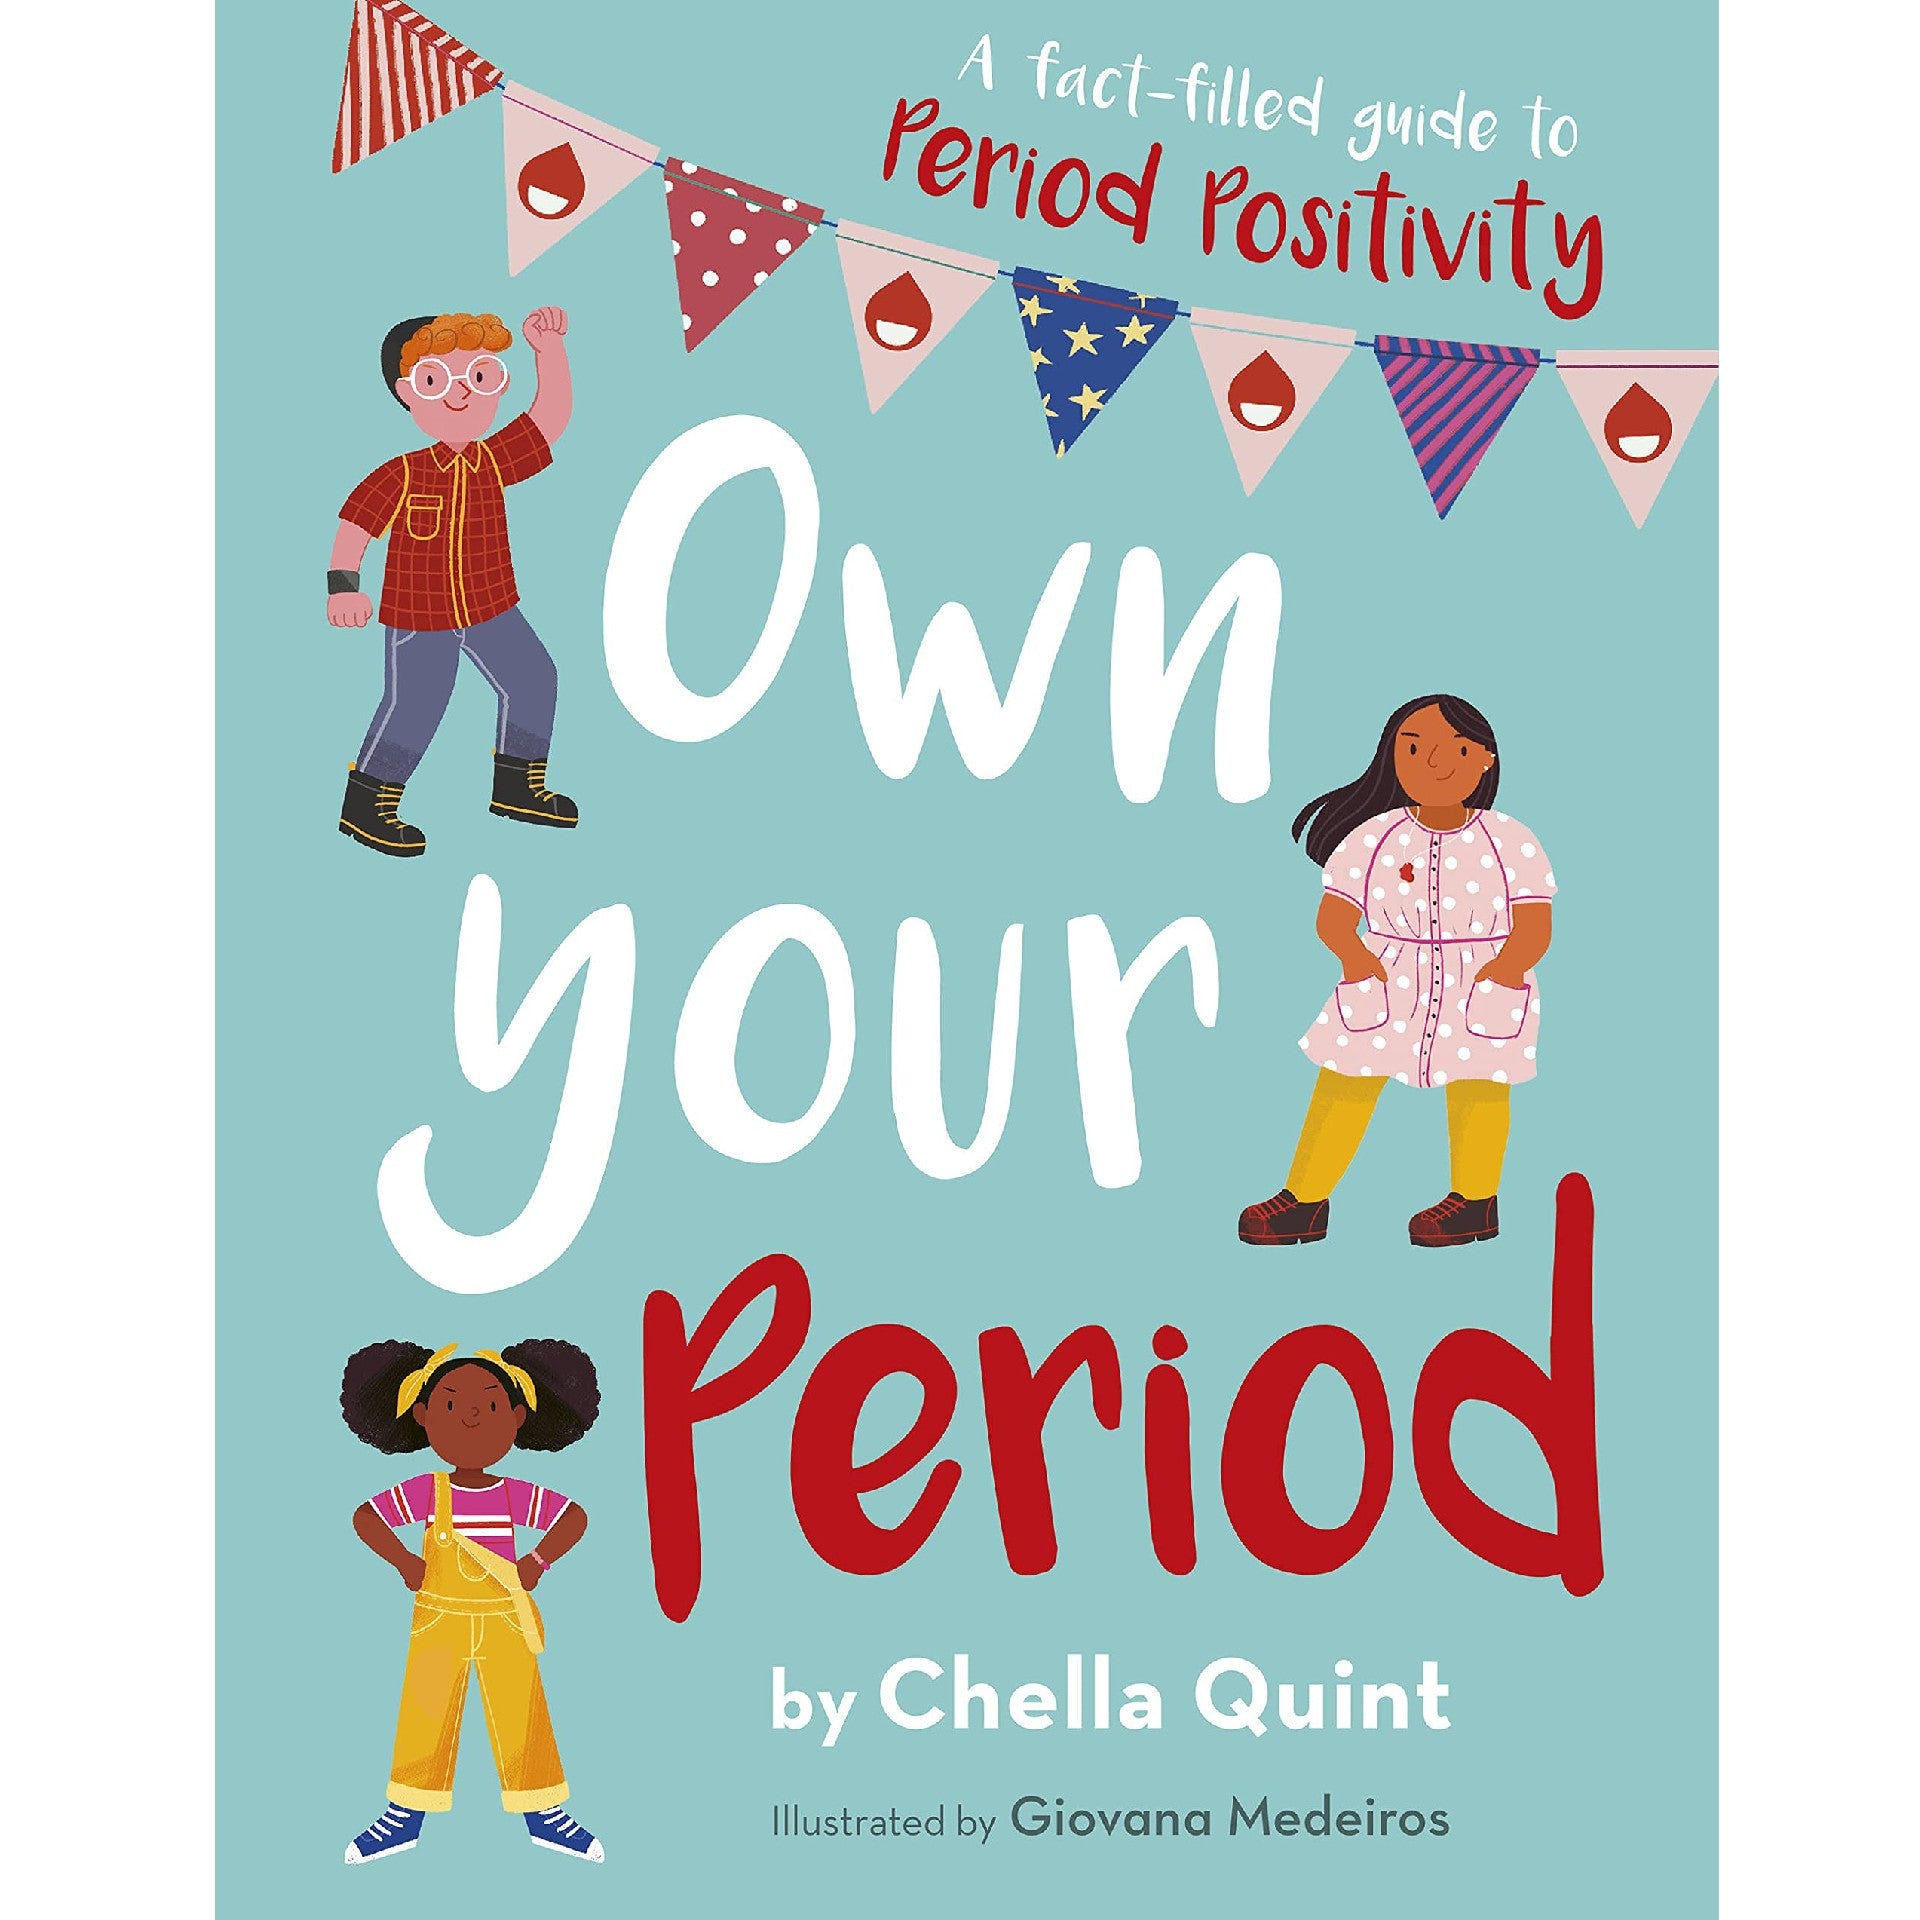 Own Your Period: A Fact-Filled Guide to Period Positivity